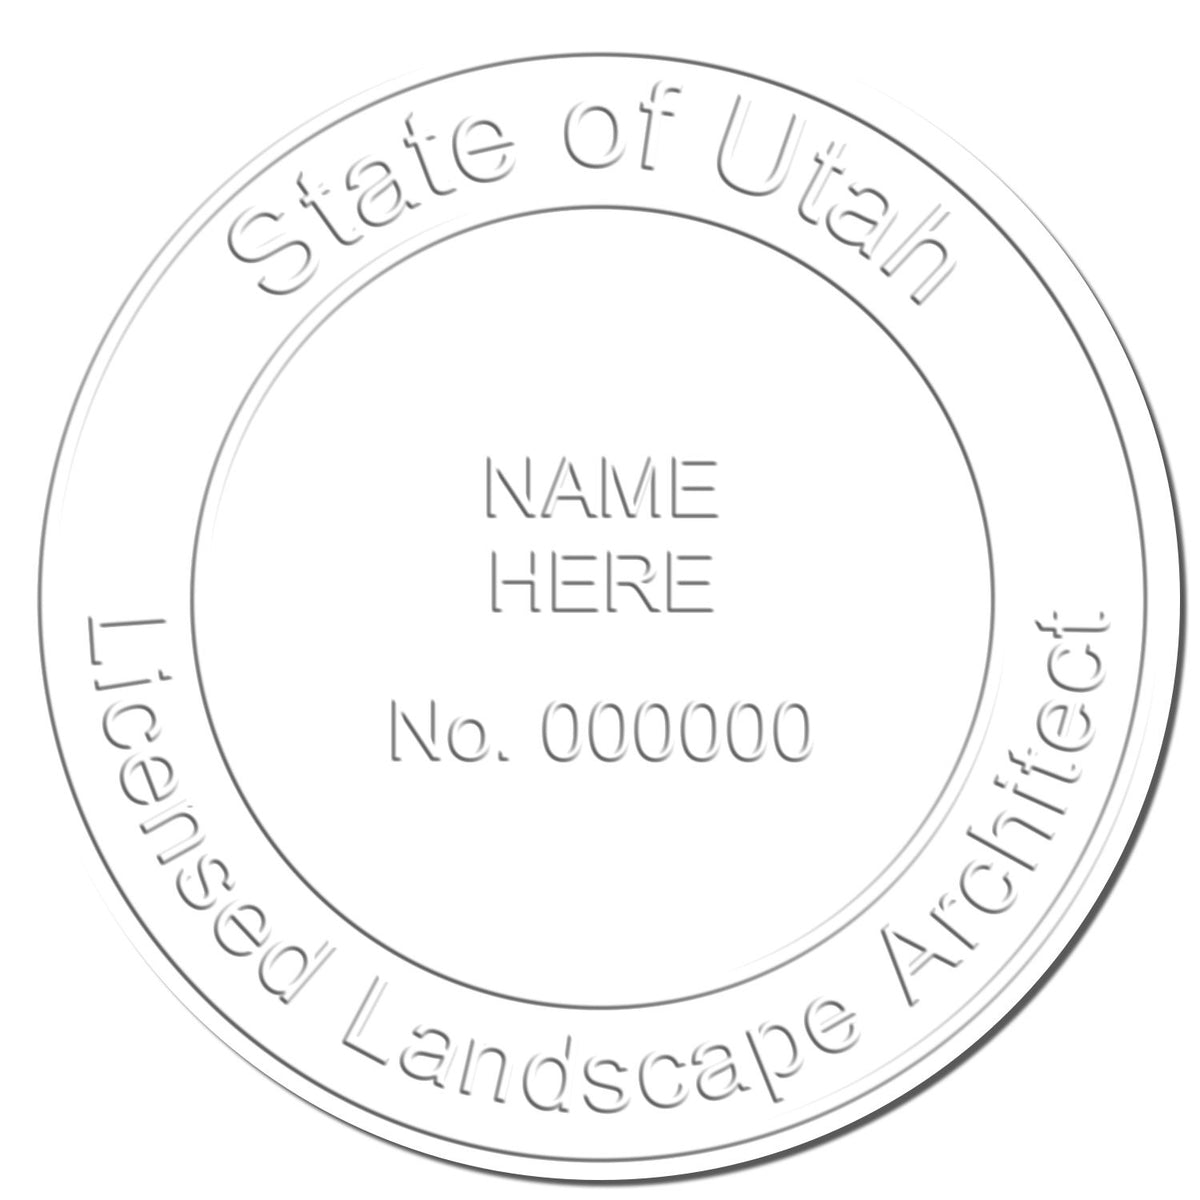 This paper is stamped with a sample imprint of the Hybrid Utah Landscape Architect Seal, signifying its quality and reliability.